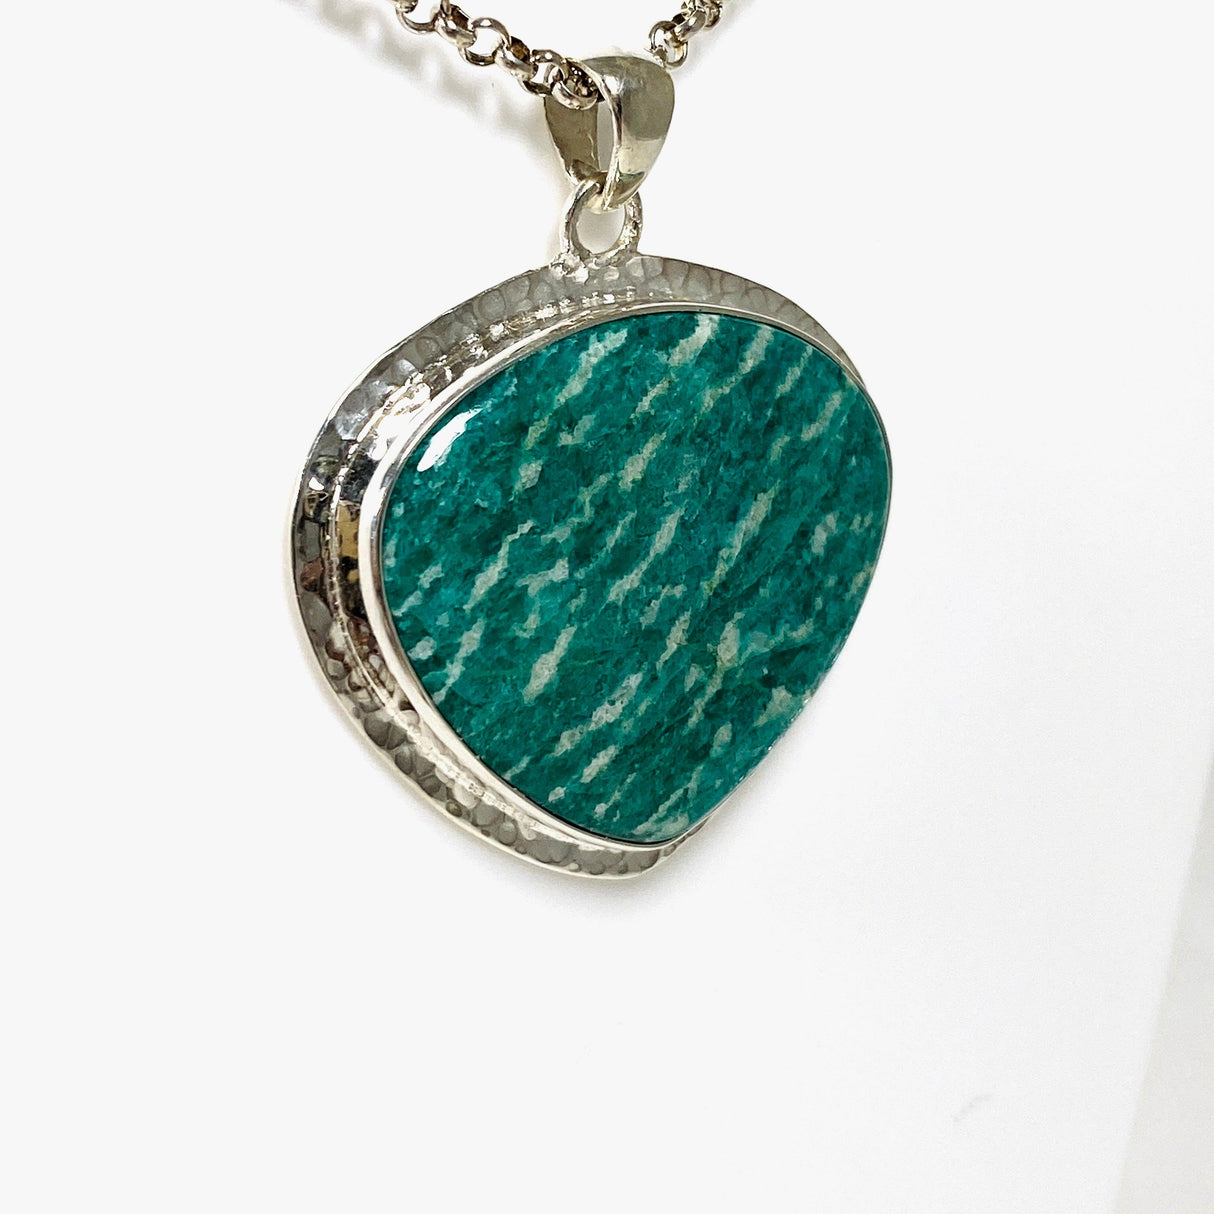 Amazonite teardrop pendant with a hammered setting KPGJ3753 - Nature's Magick